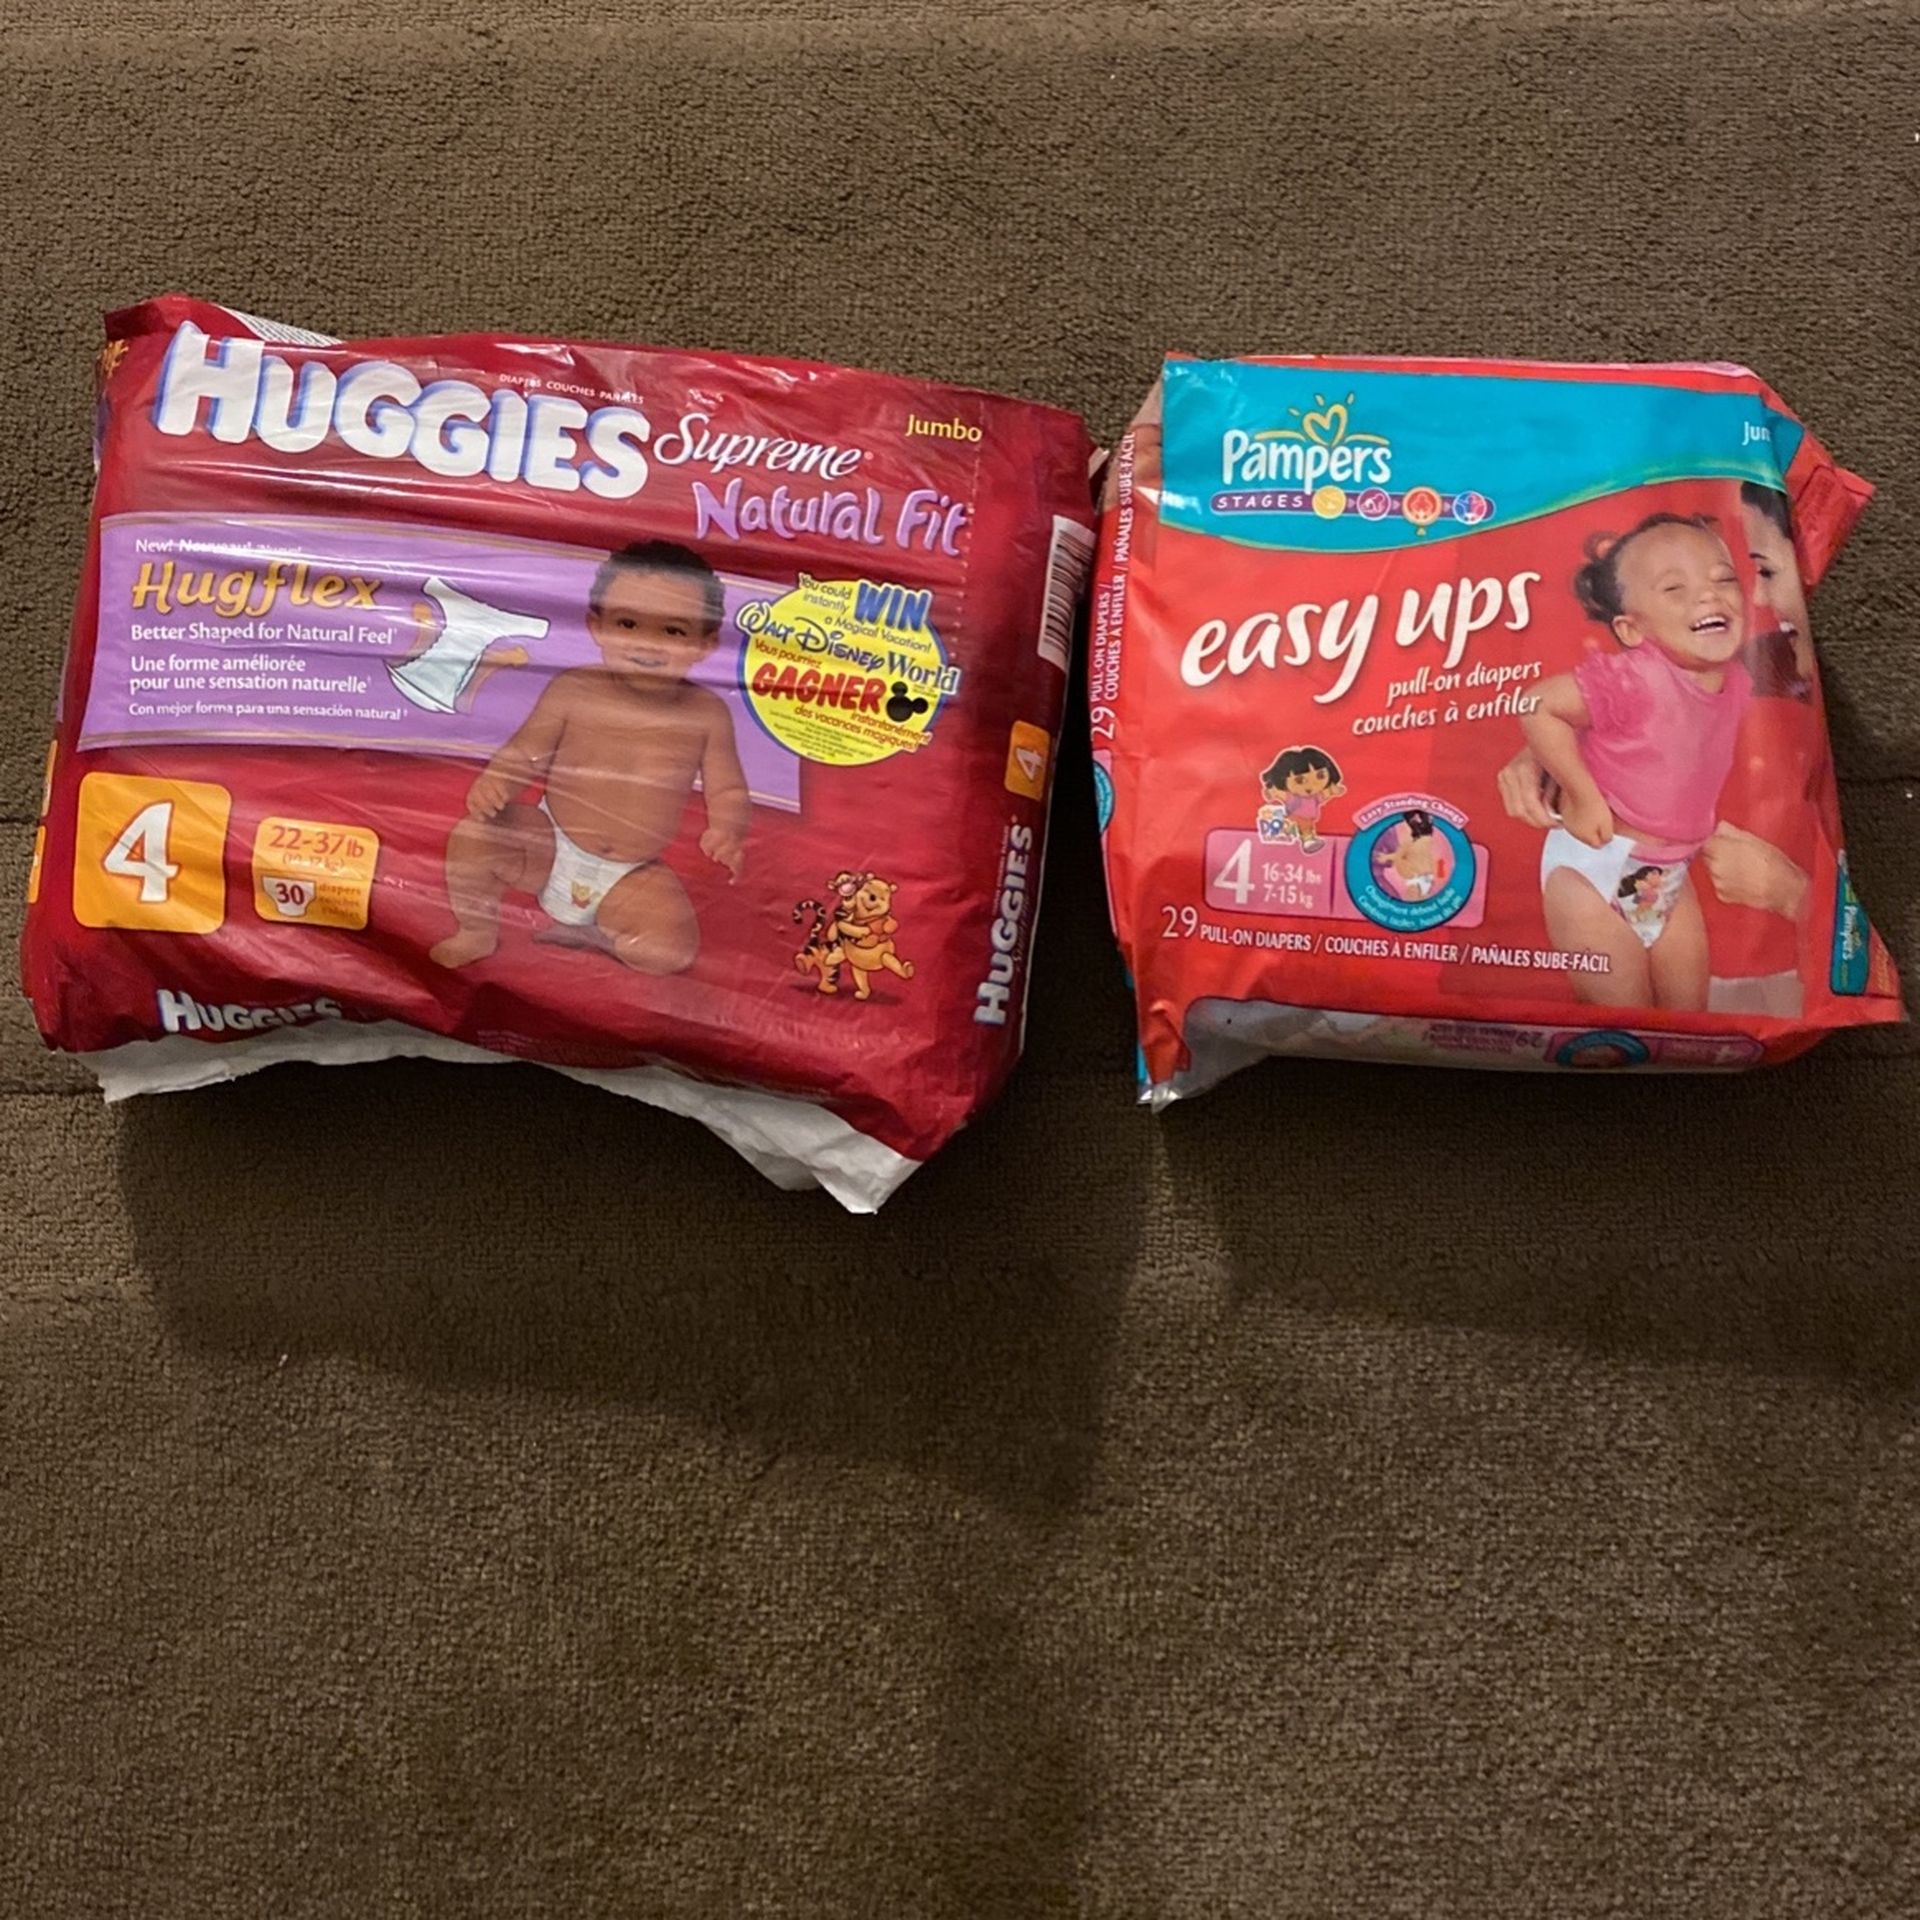 Huggies Supreme Natural fit #30 And Pampers Easy Ups #29 For 4